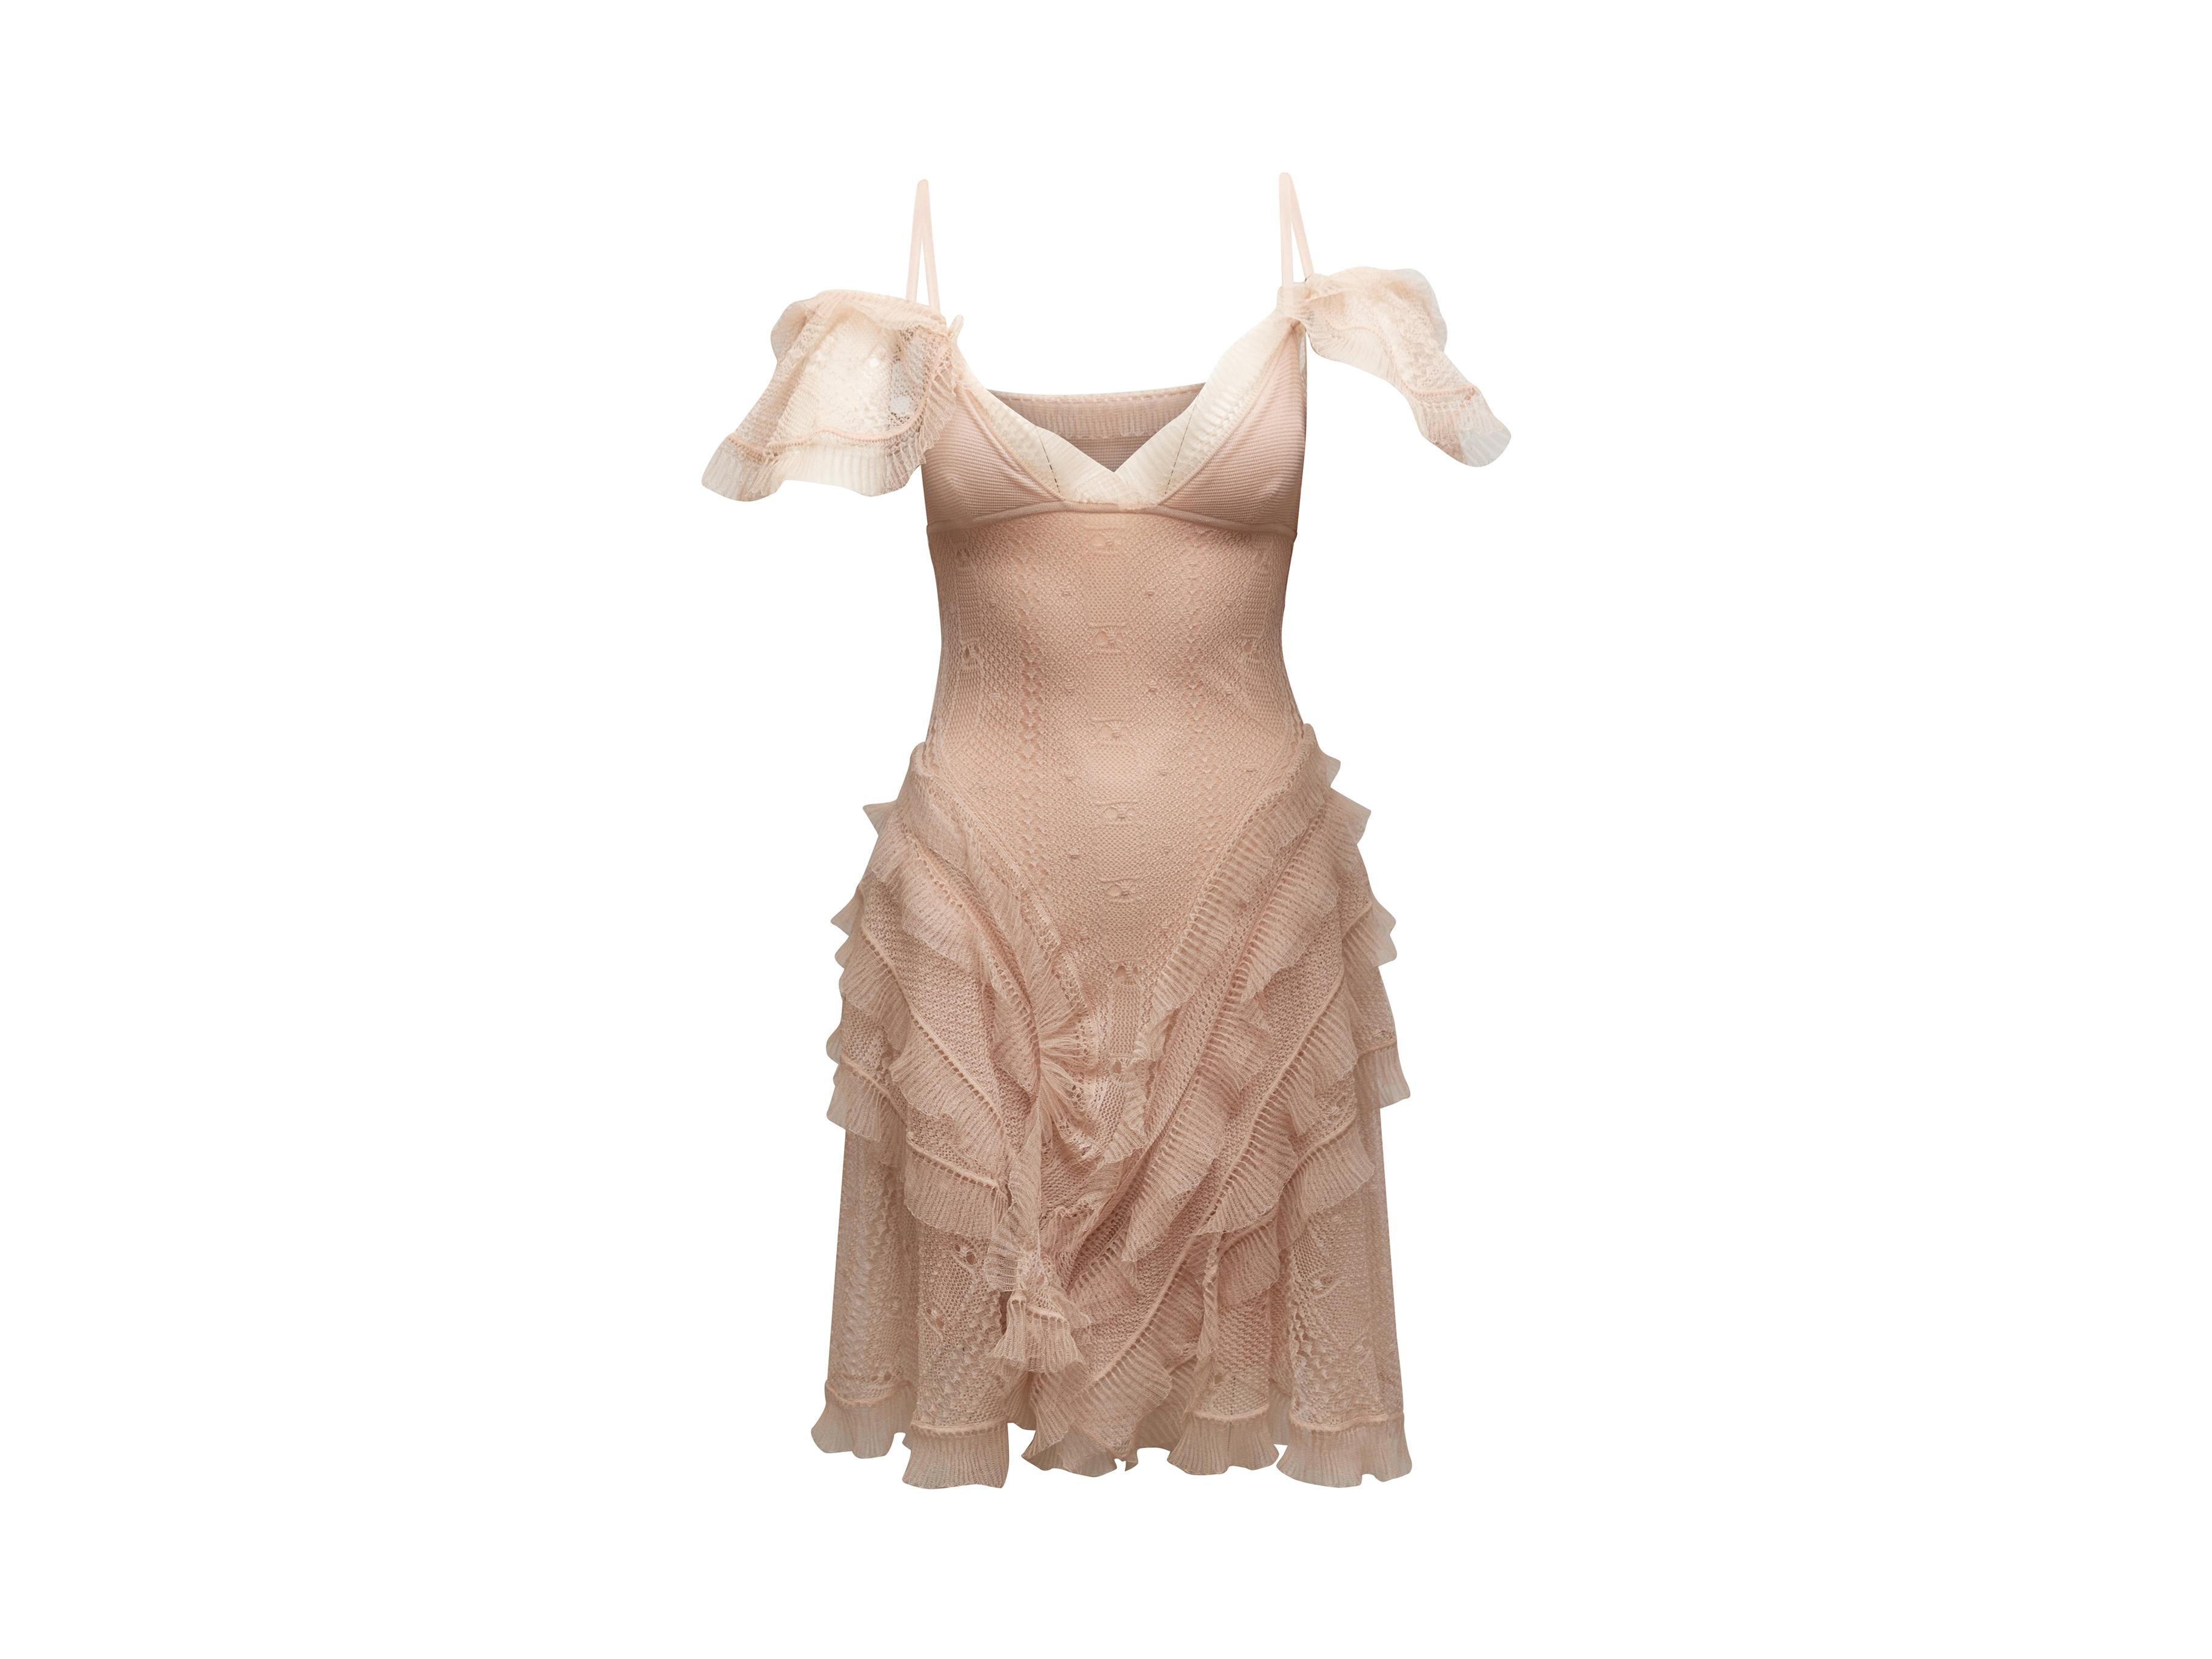 Product details: Blush silk knit cold-shoulder dress by Alexander McQueen. Ruffle trim throughout. V-neck. 27